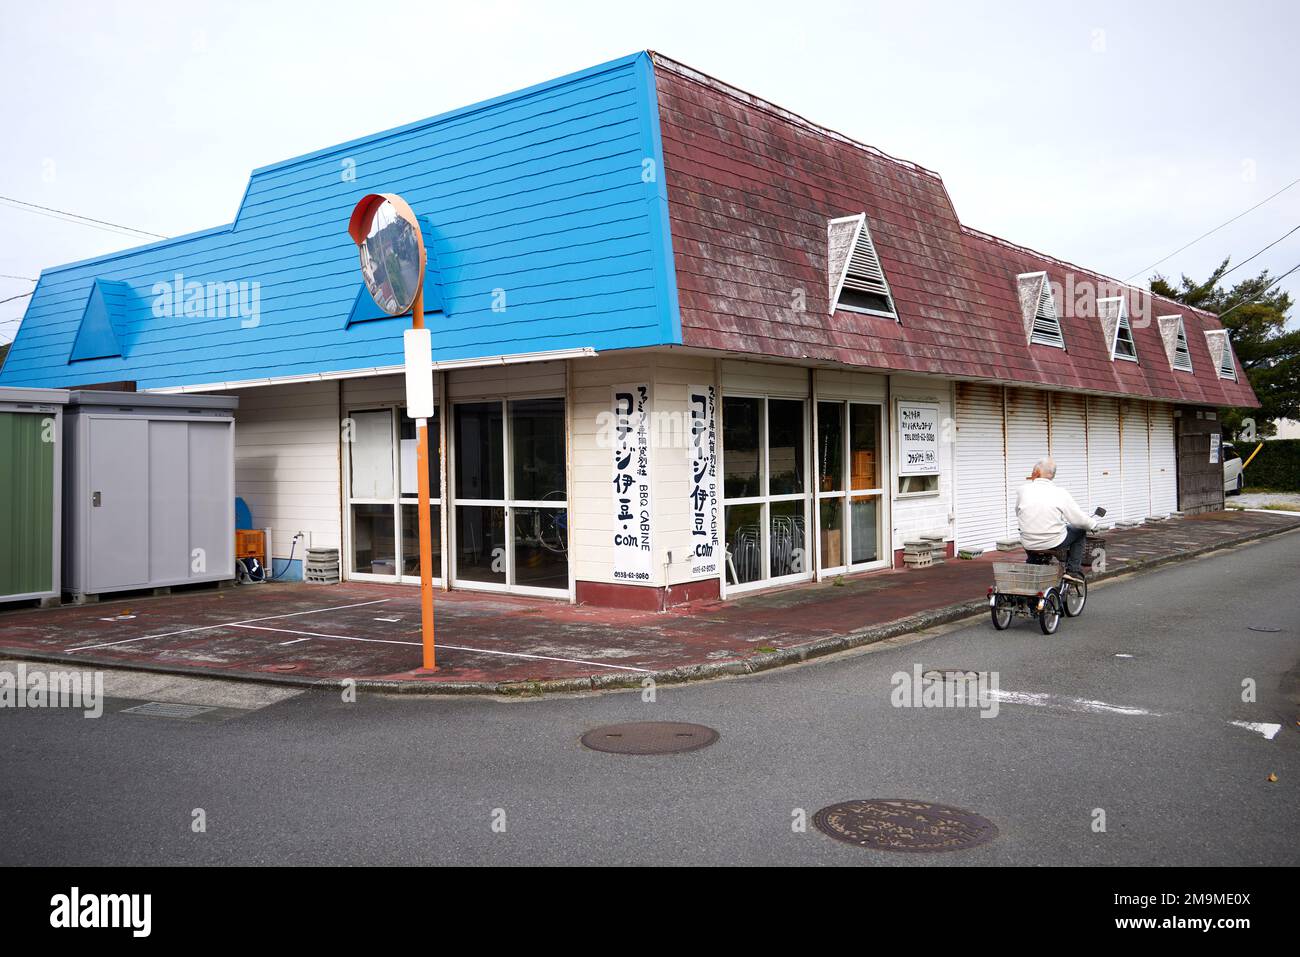 Abandoned house on the corner of the street in Japanese countryside Stock Photo